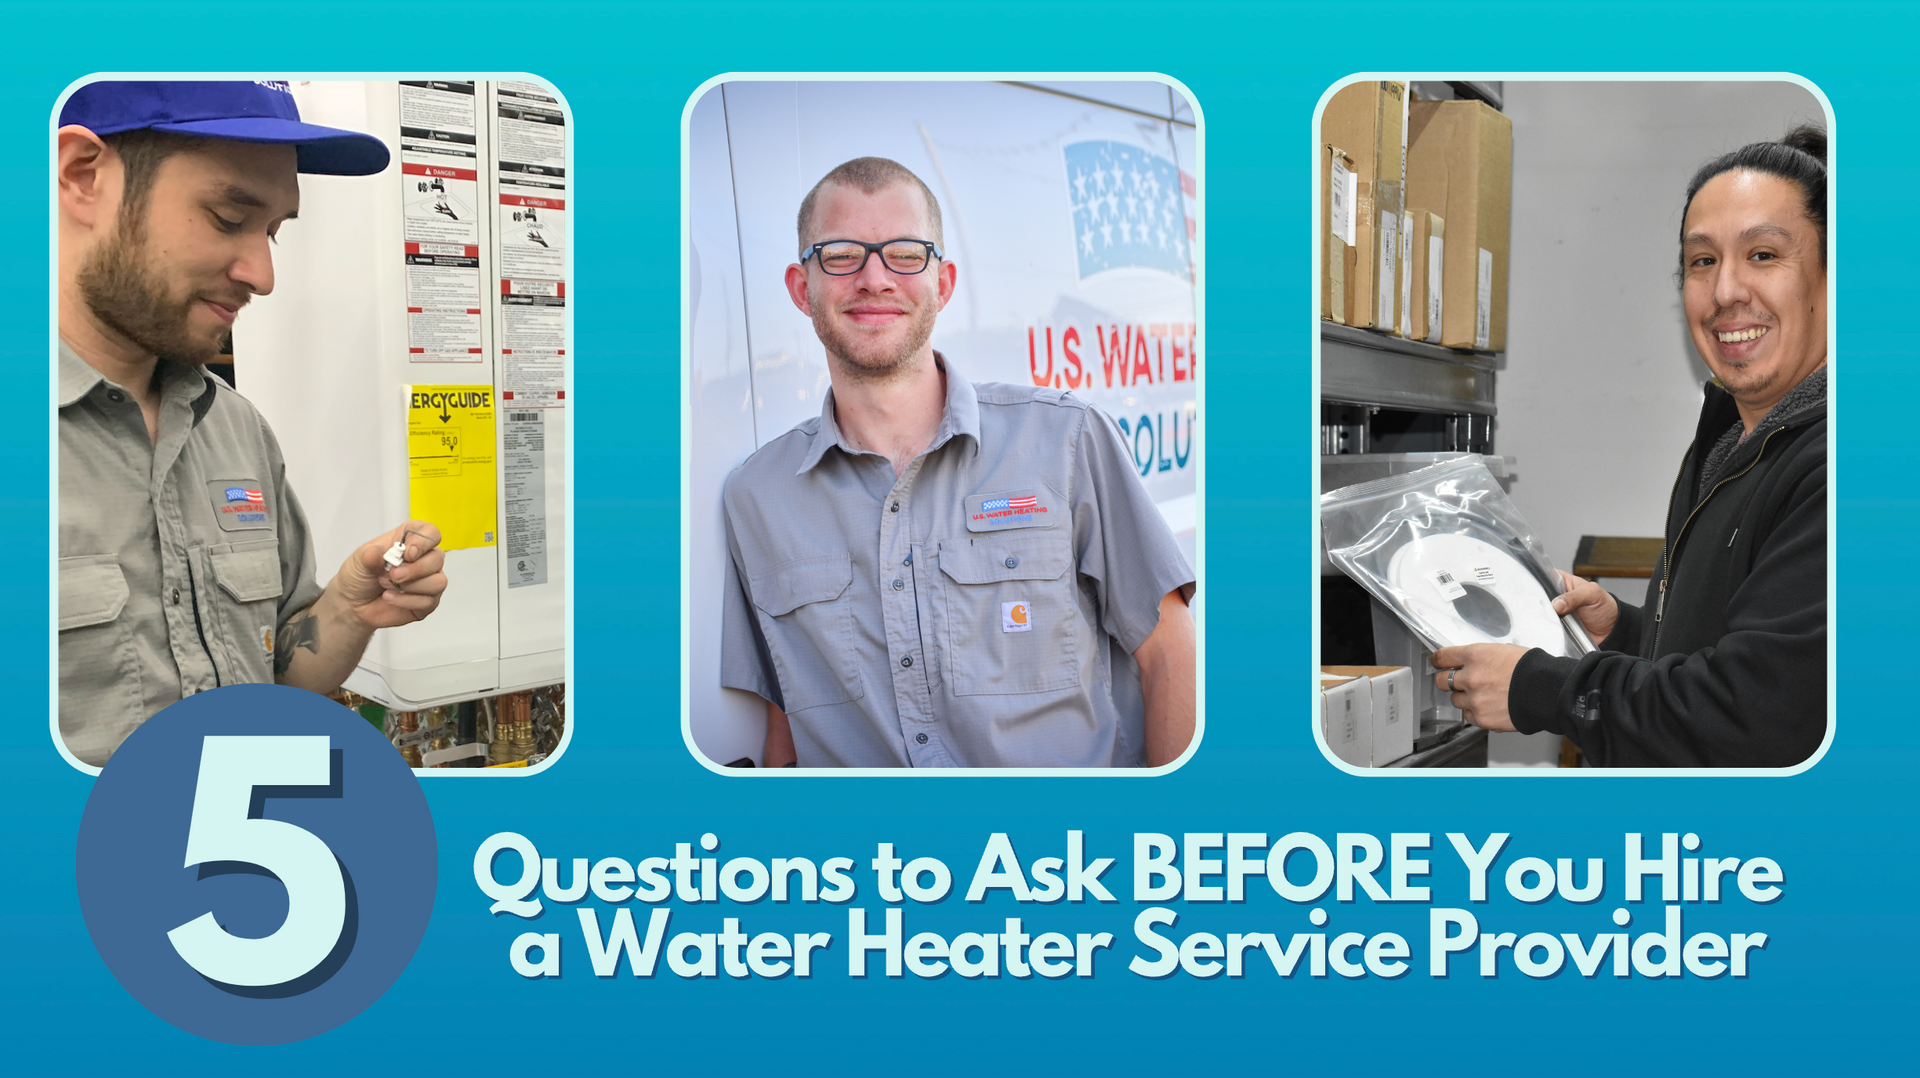 5 Questions to Ask Your Water Heater Service Provider - Warranty, Parts, Service Experience